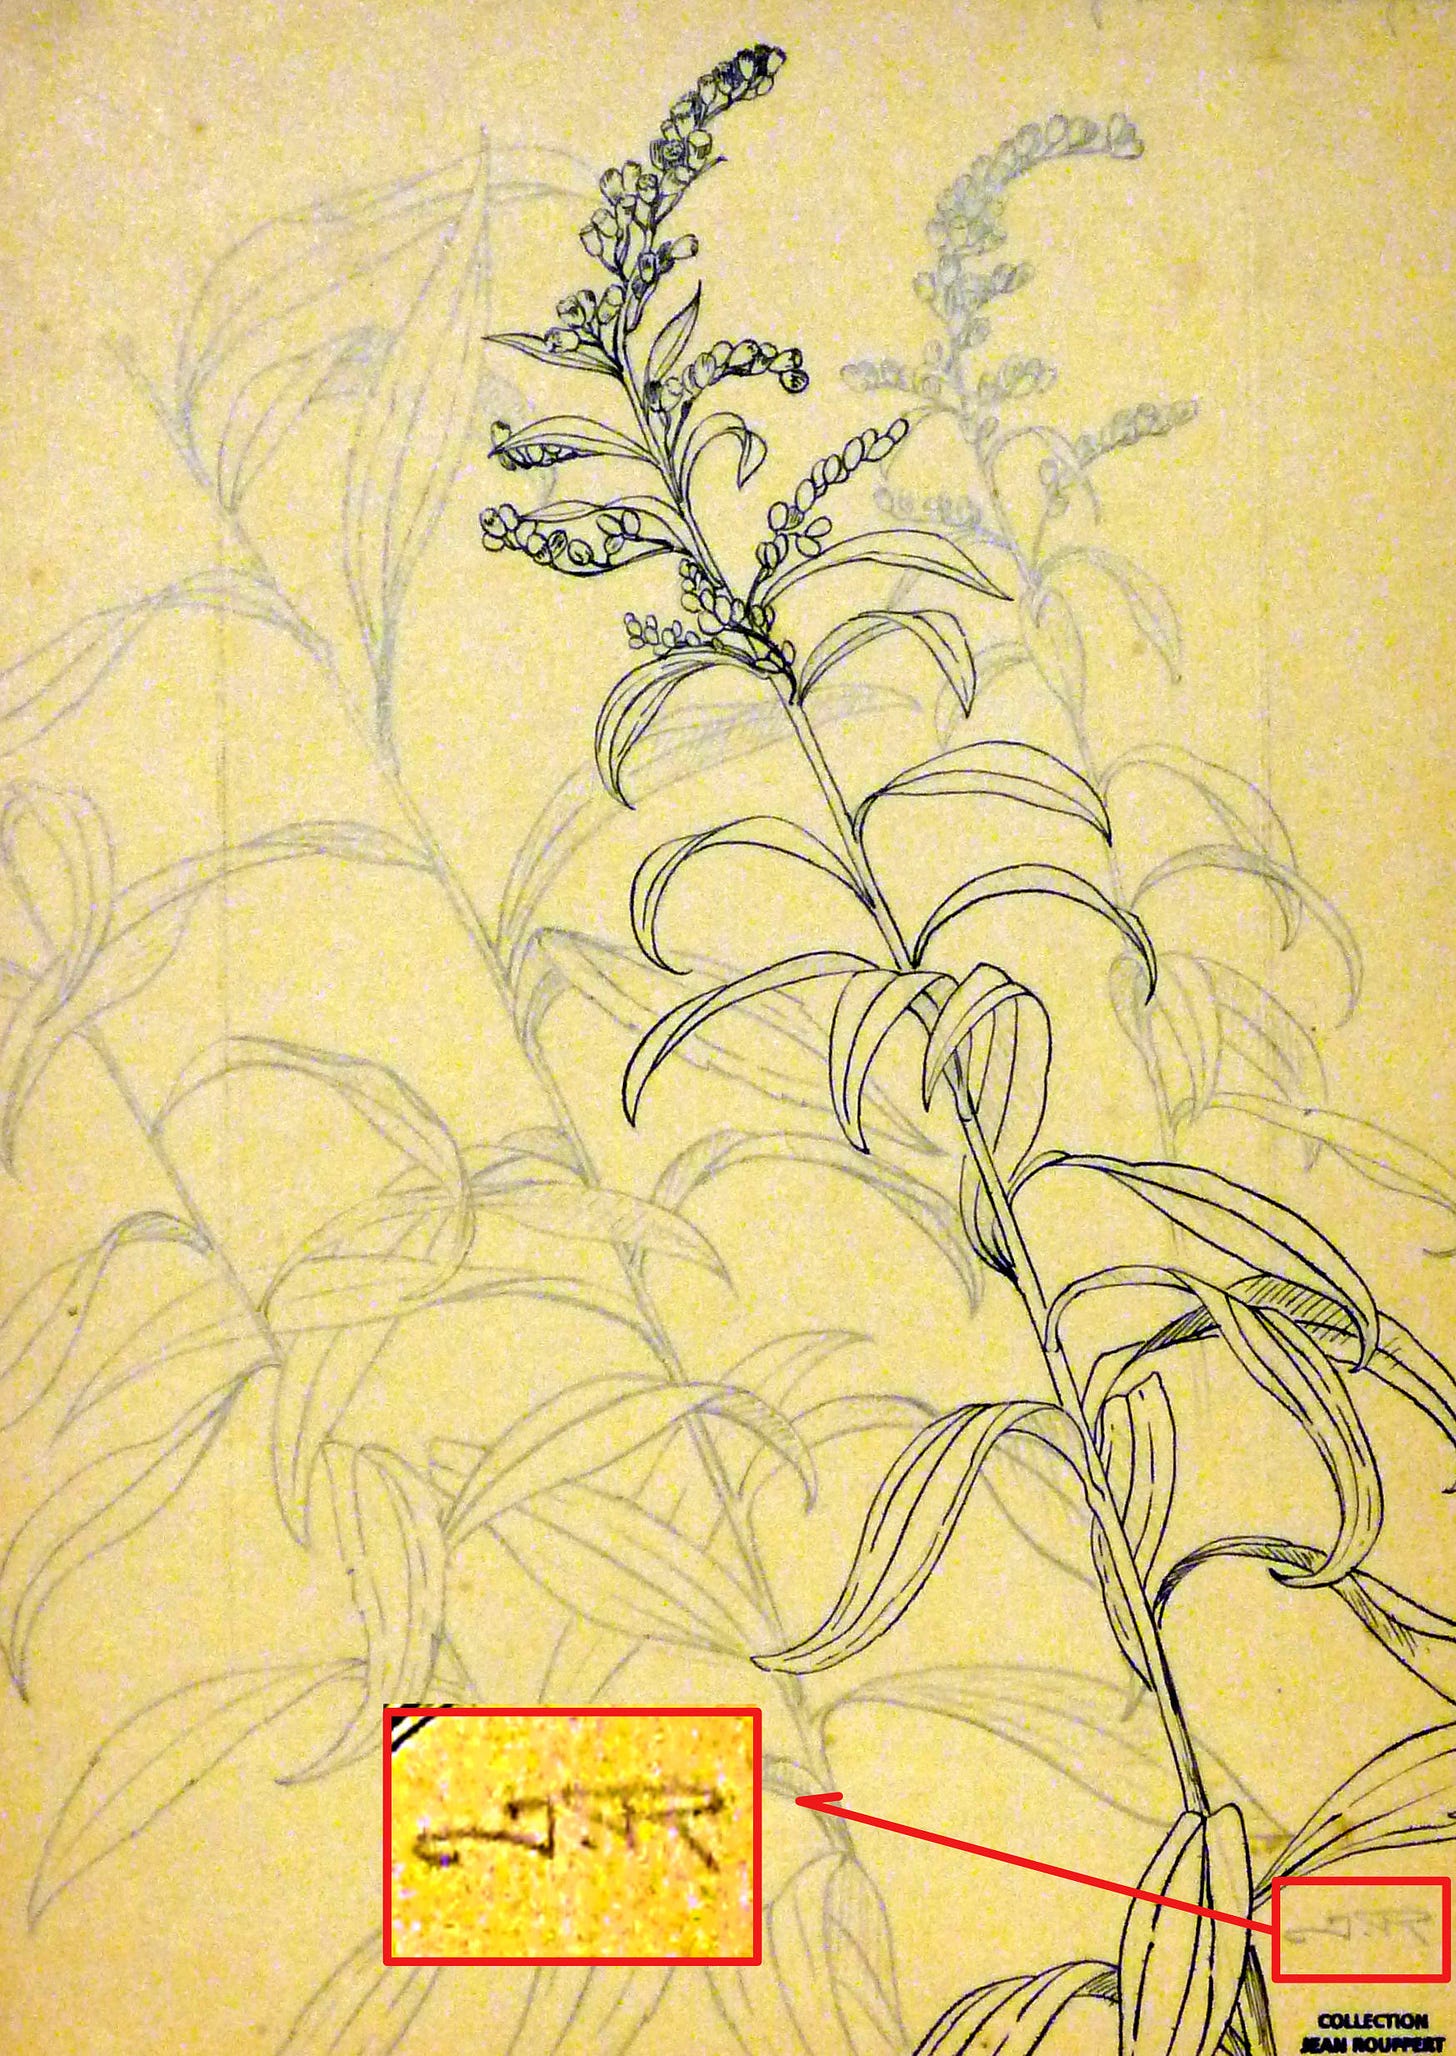 Jean Rouppert, Gerbe d'or, floral studies, pencil and ink on paper, signed, undated (private collection).